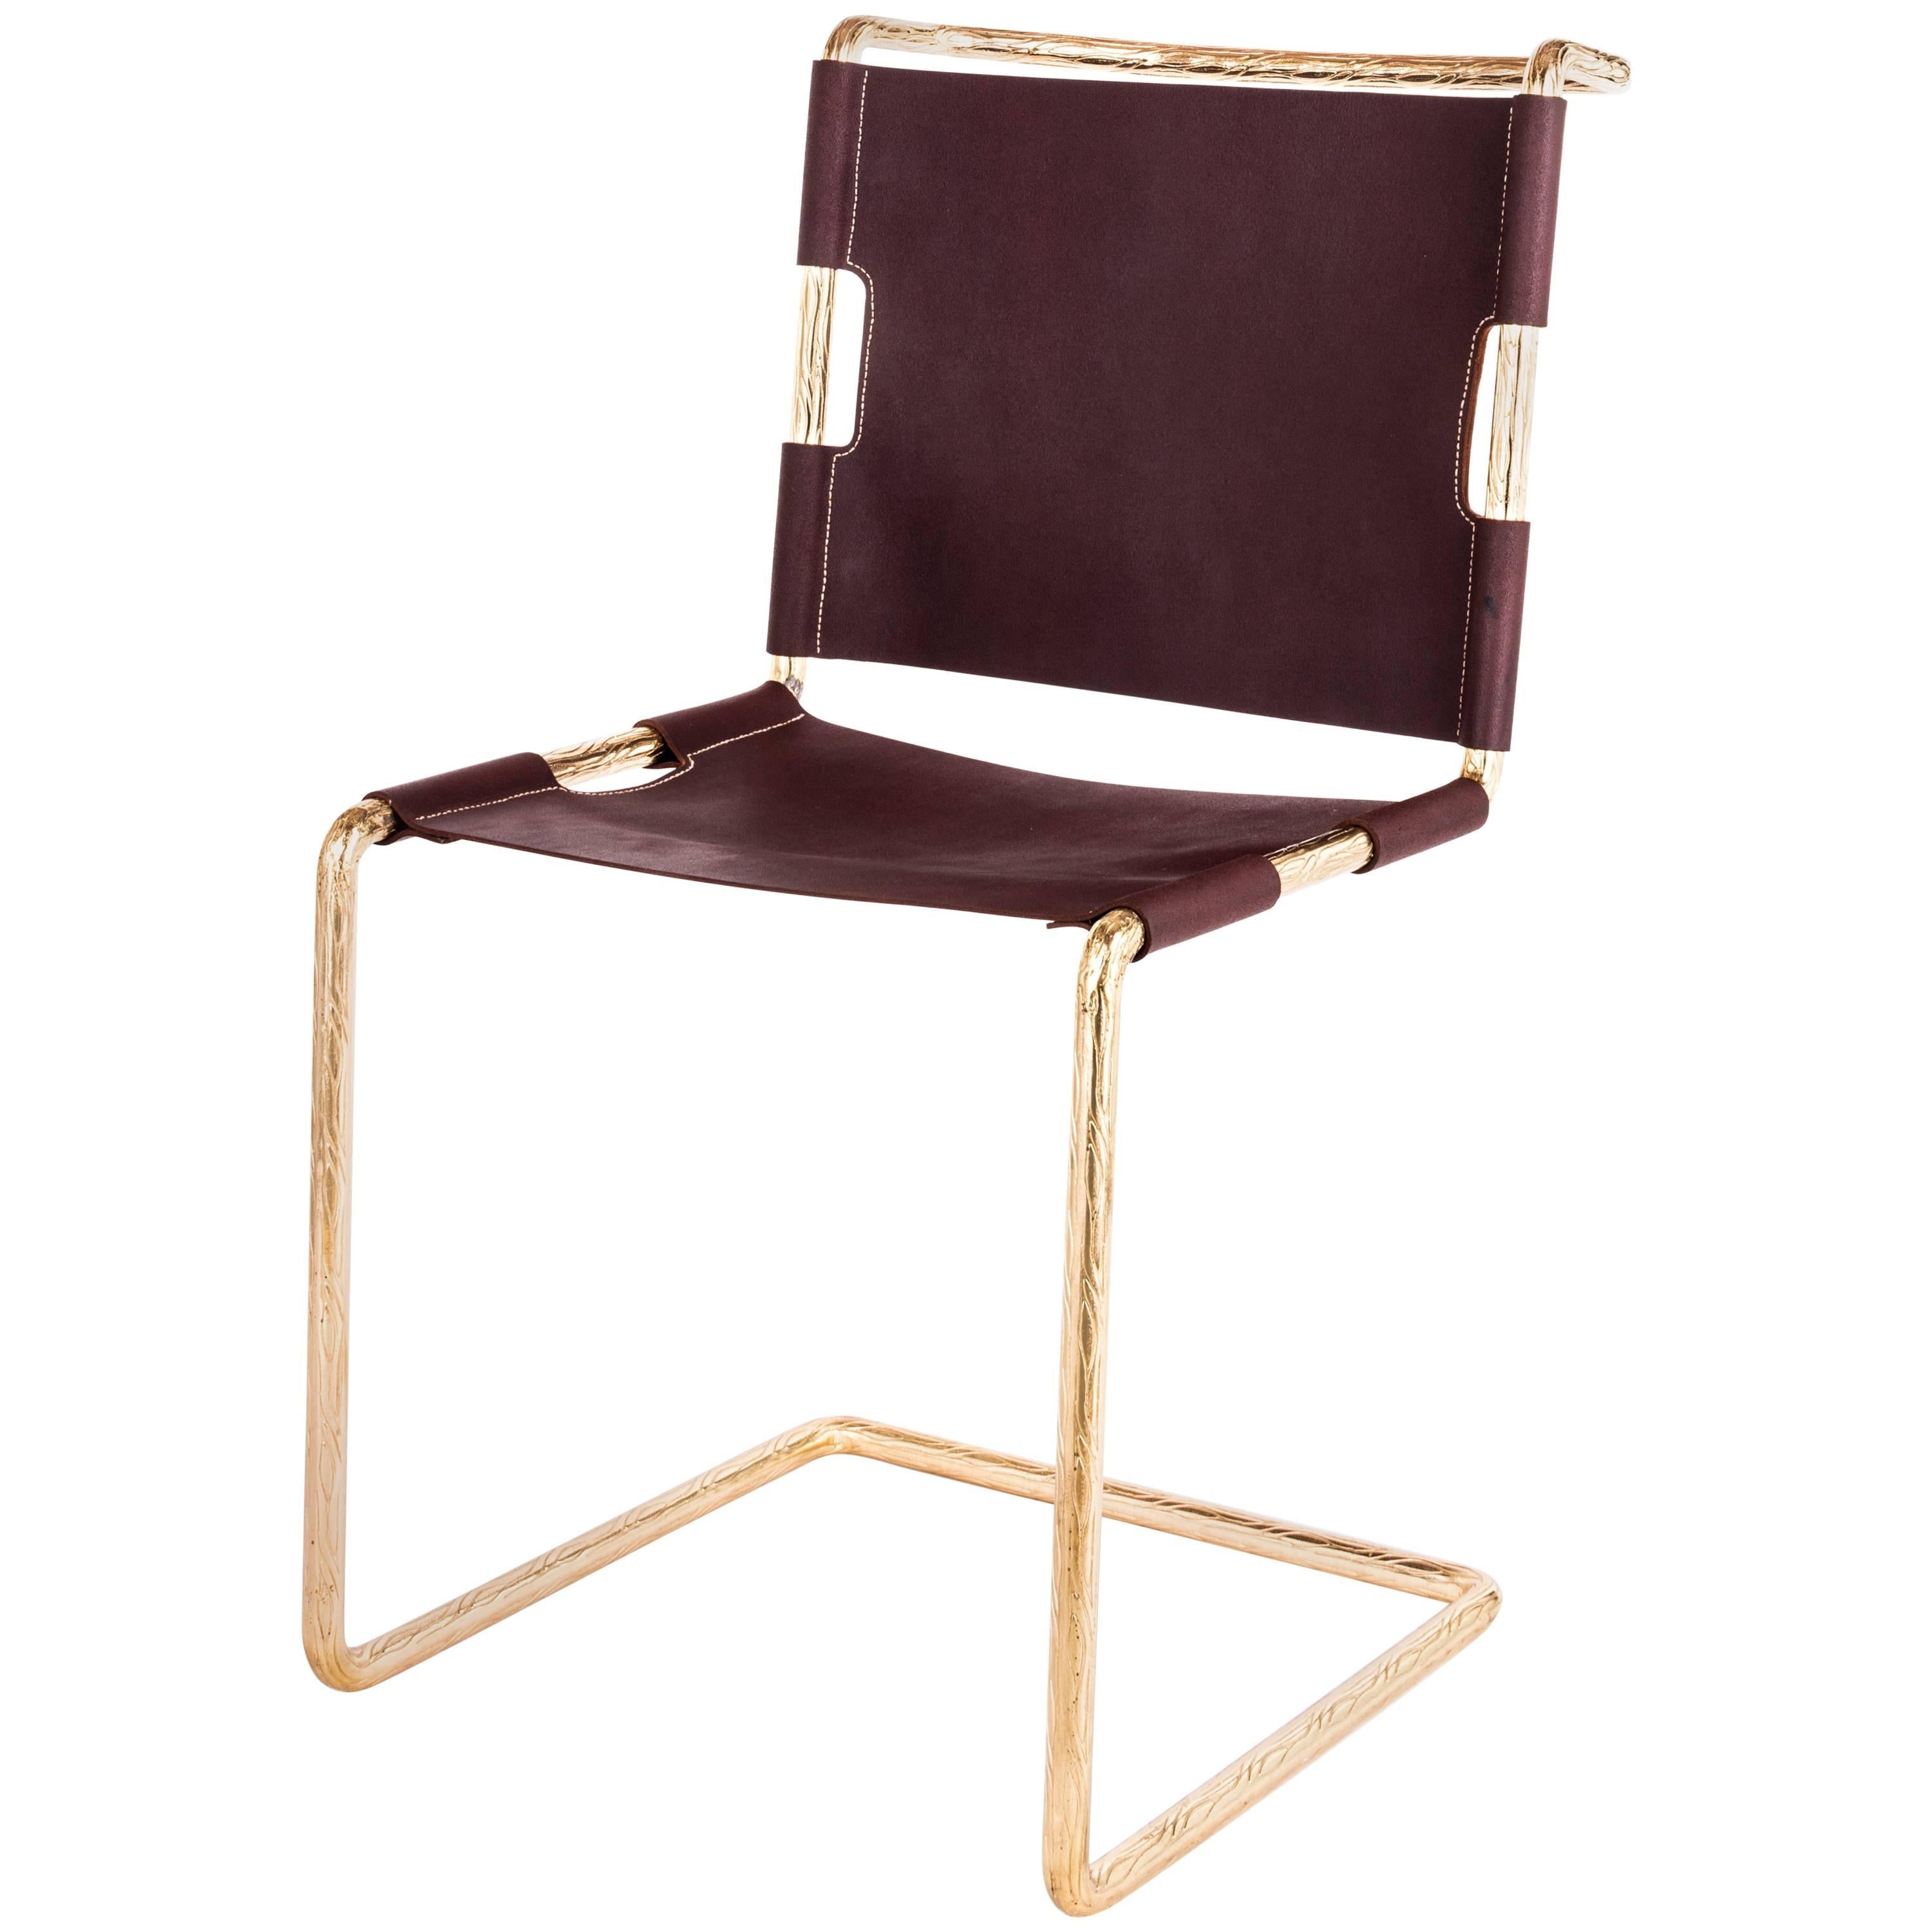 Chair With Brass Finish And Water Buffalo Leather